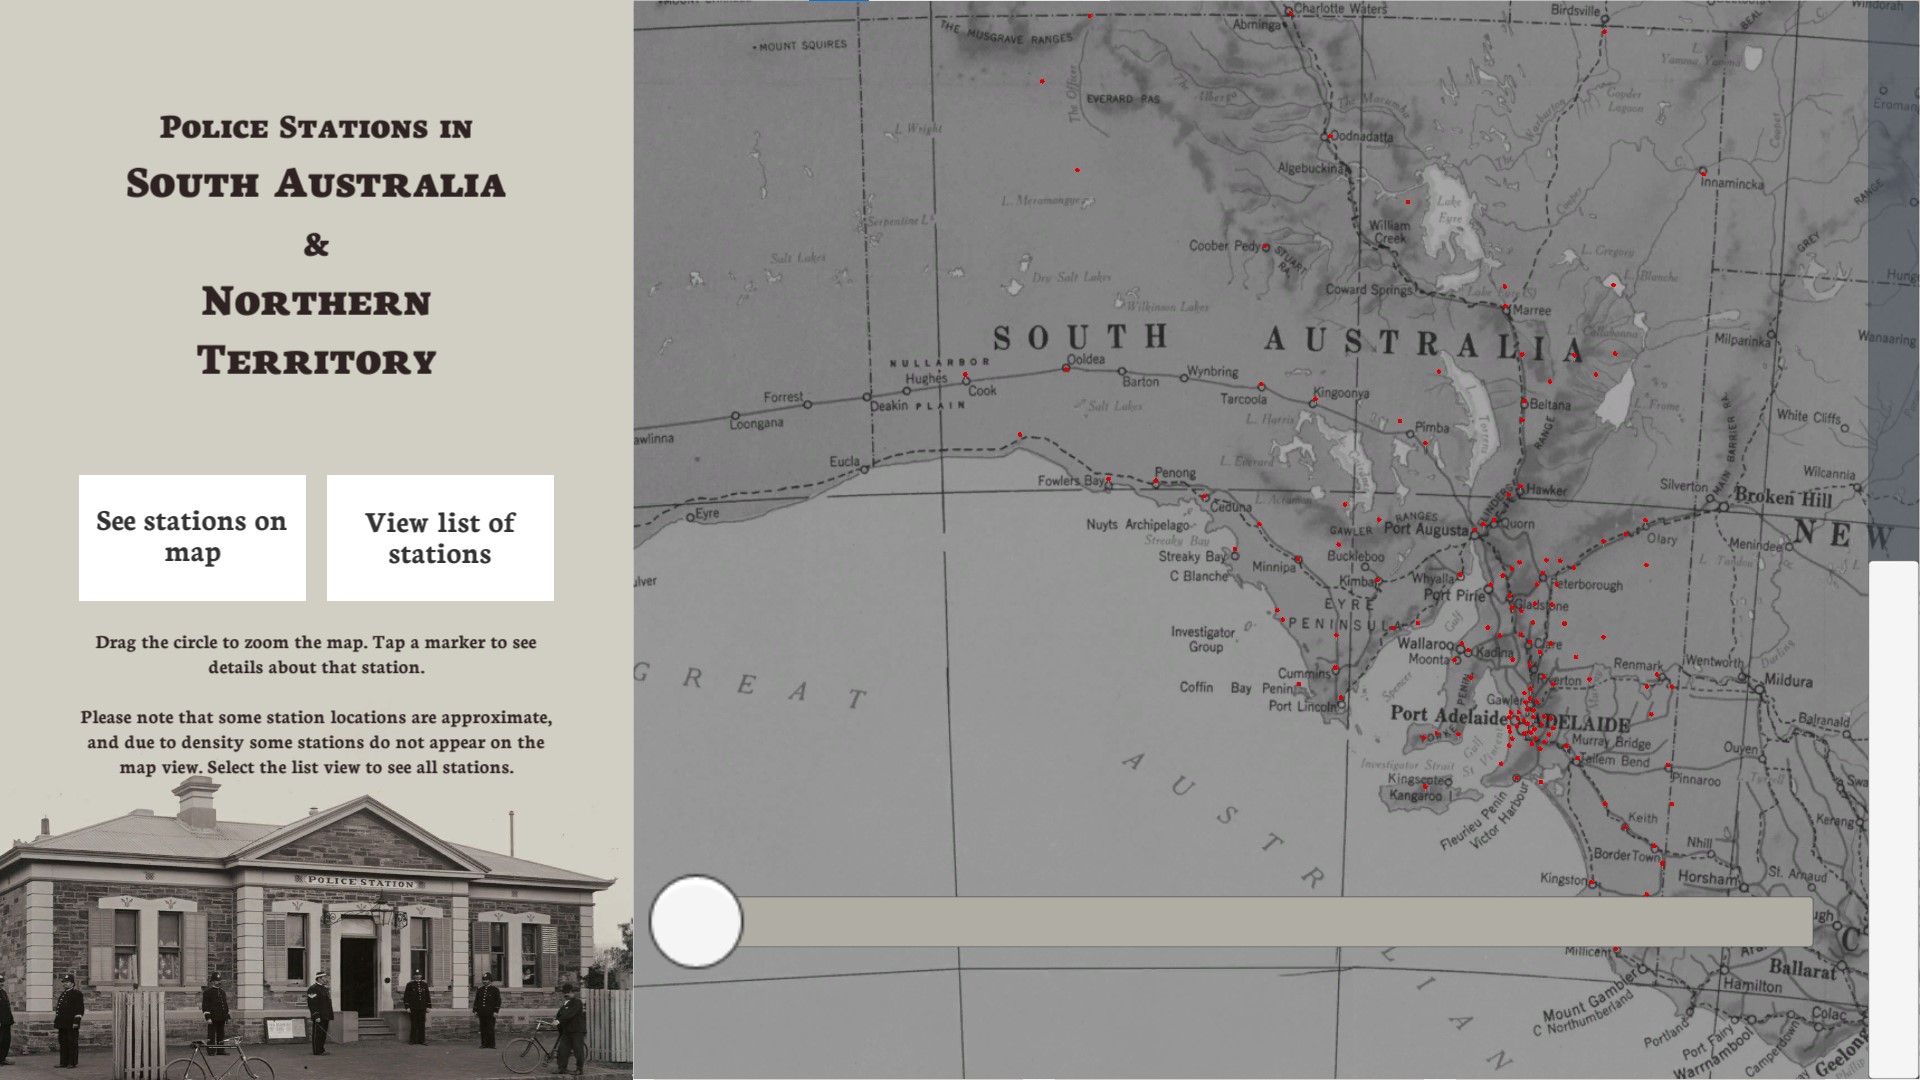 A screenshot of the station map museum kiosk, showing a map of South Australia with red pins to indicate police stations